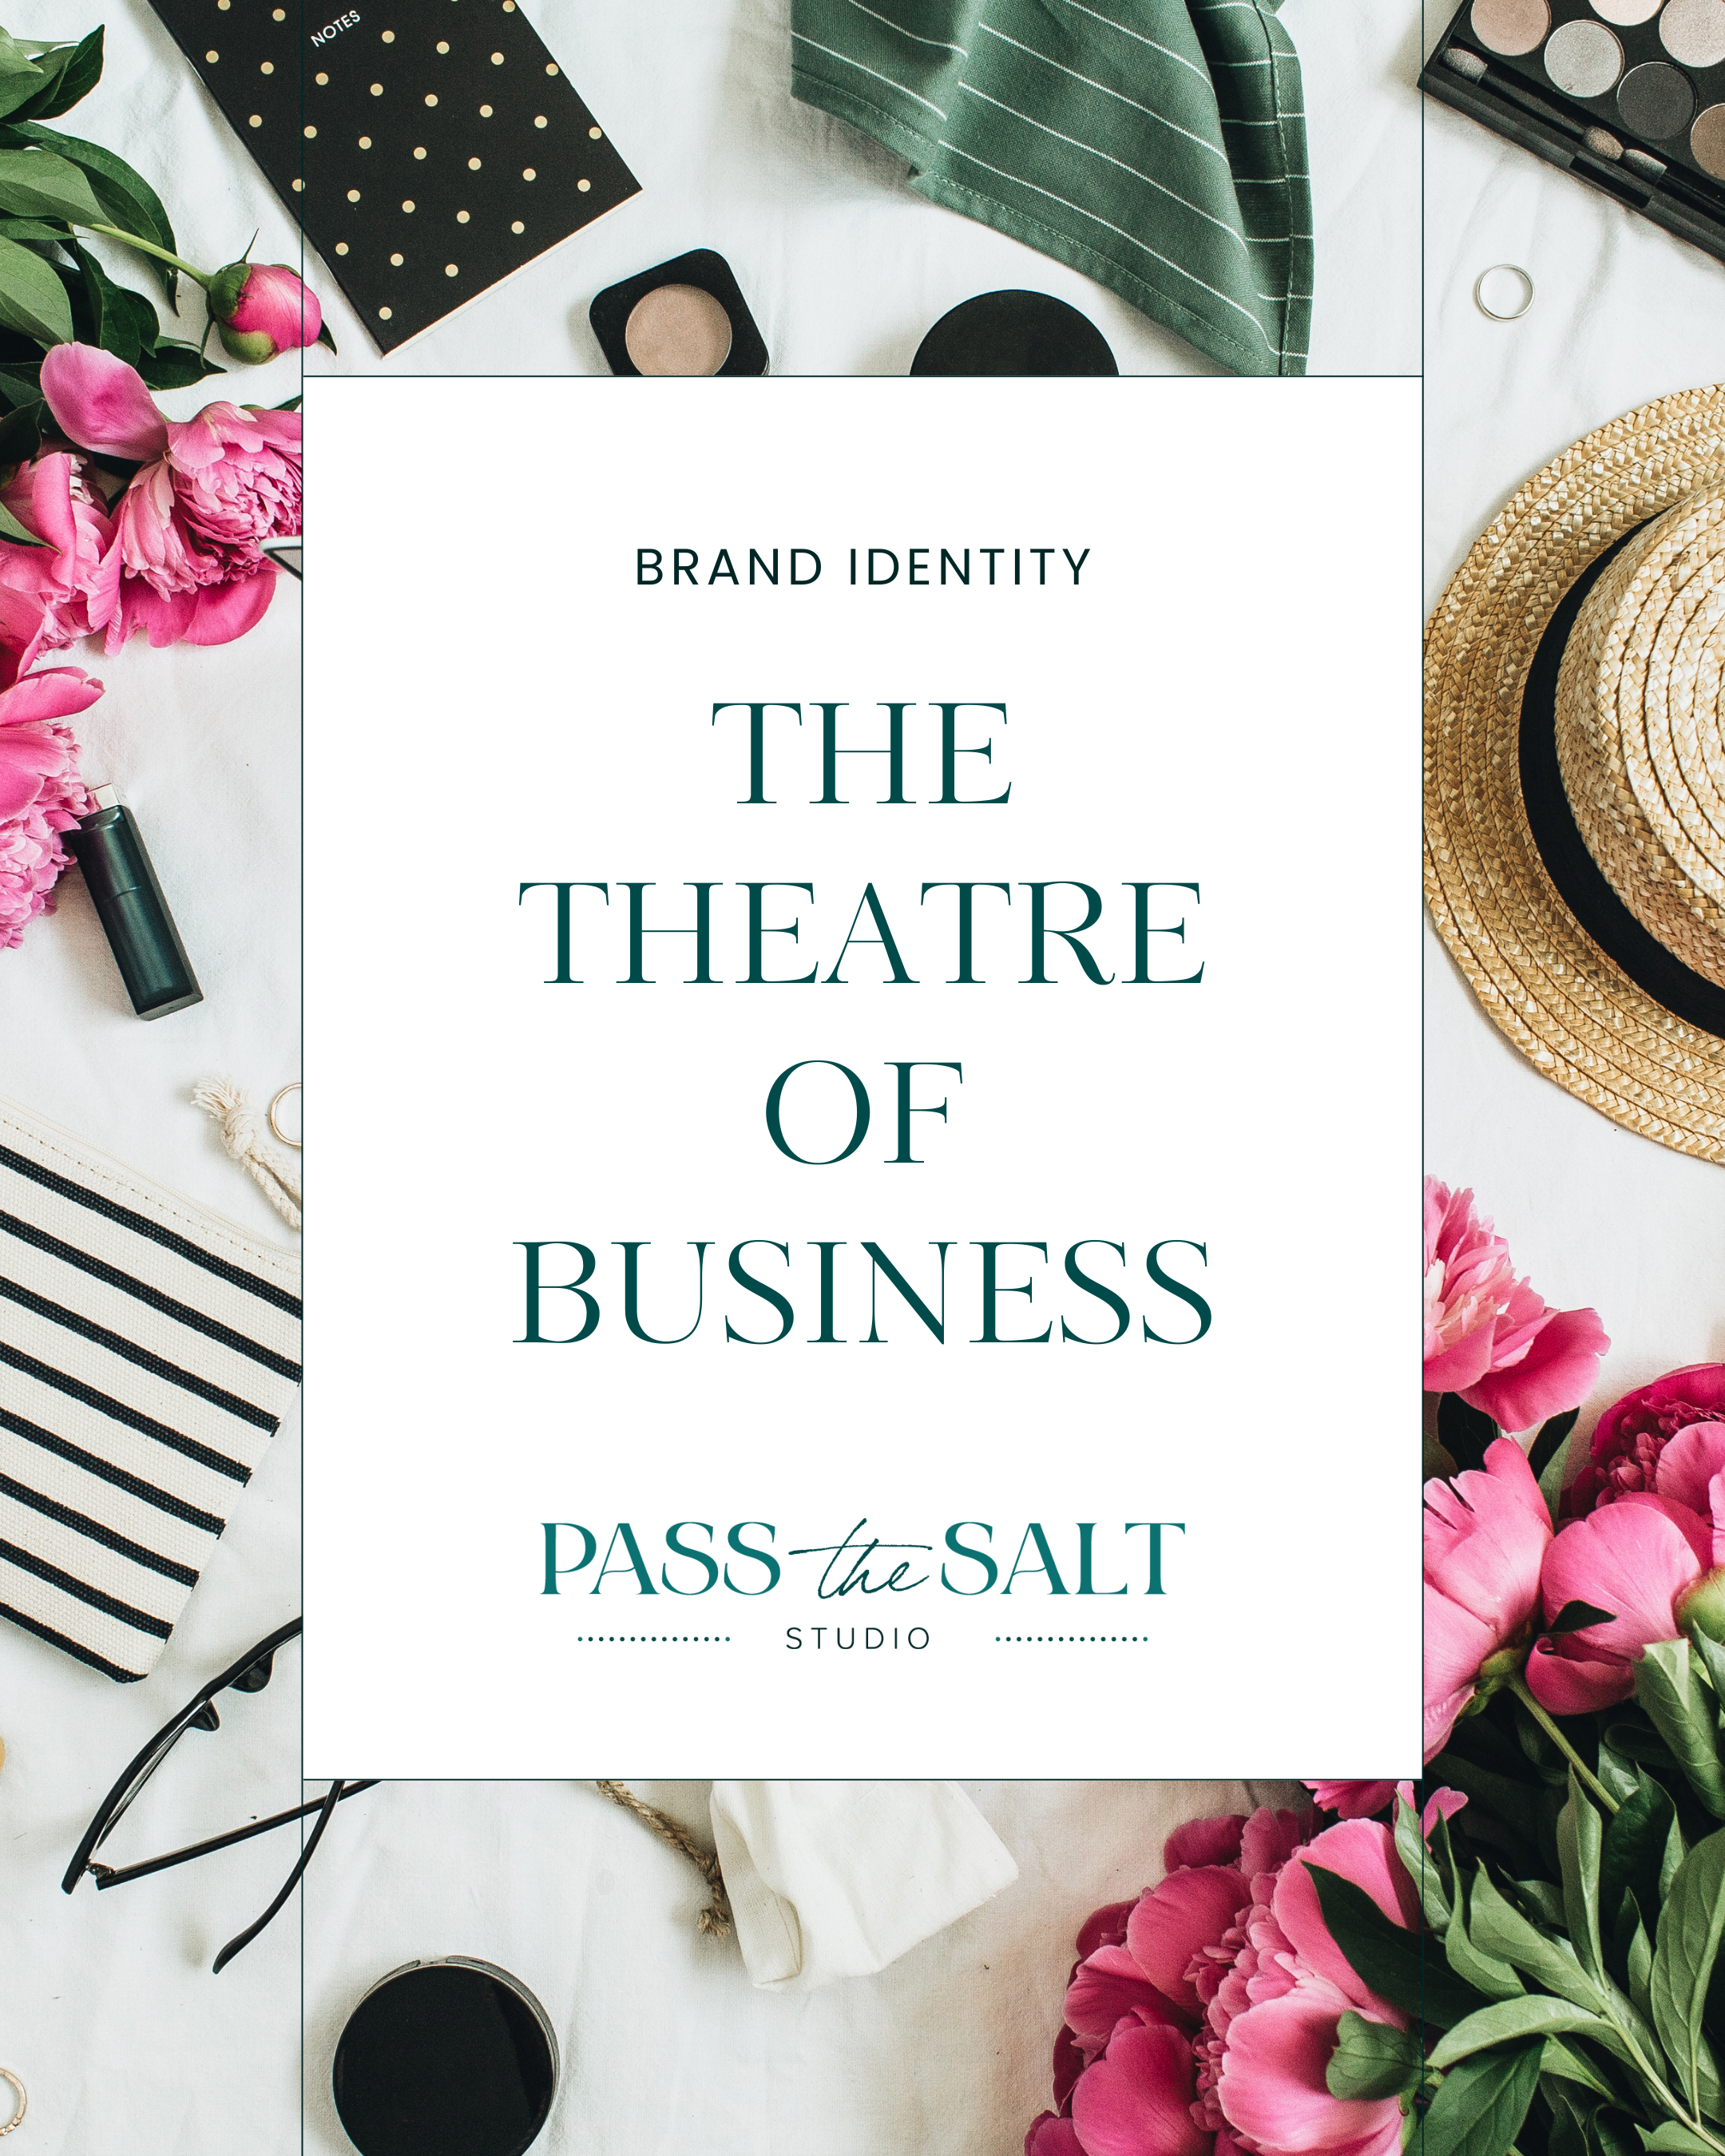 Brand Identity: The Theatre of Business